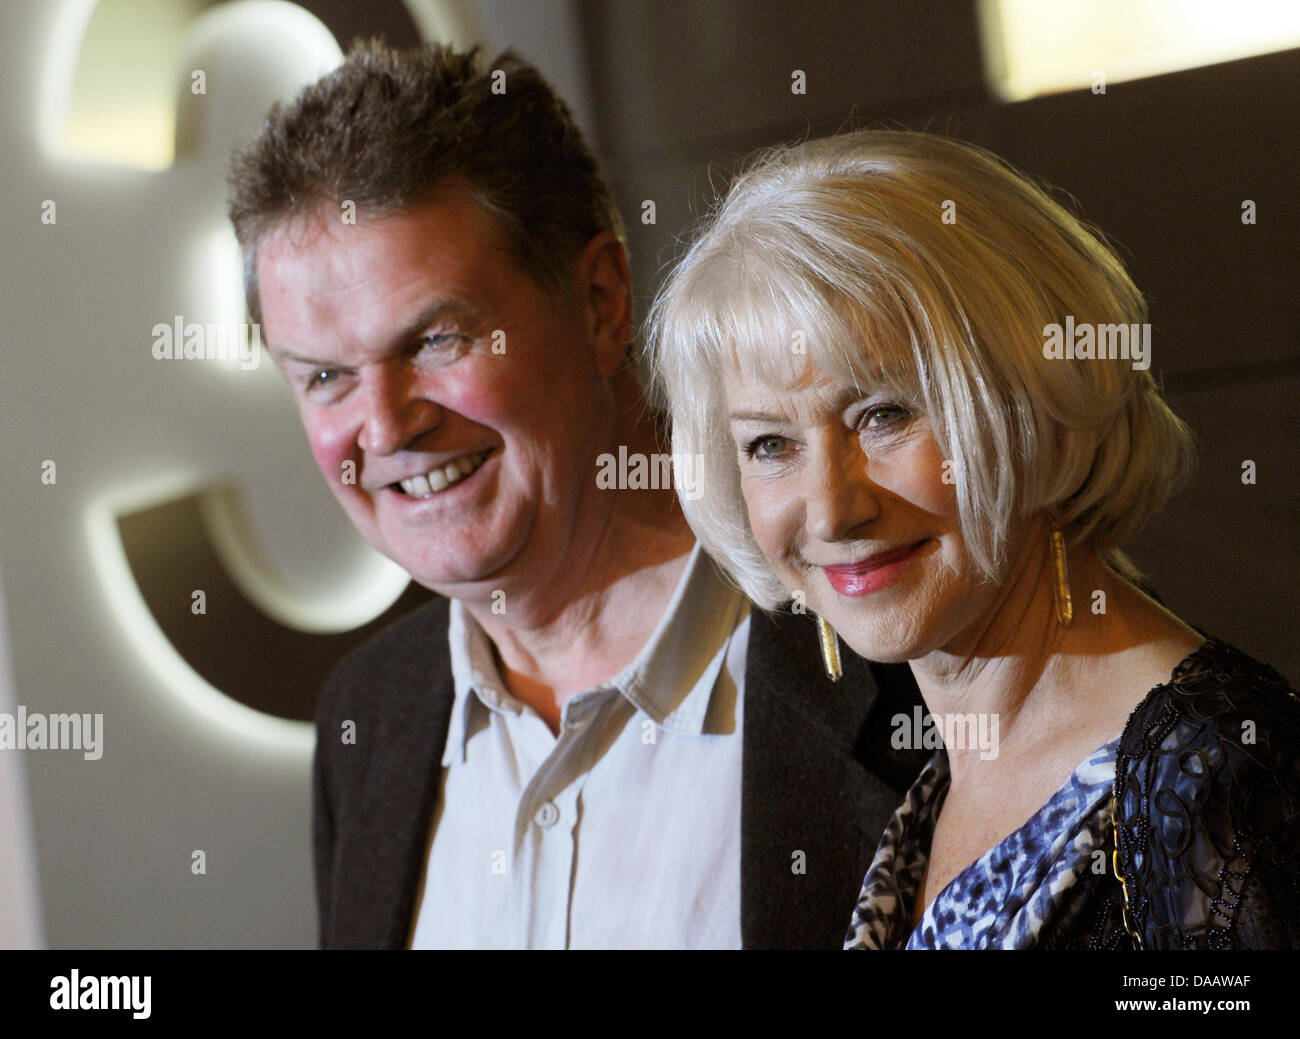 Director John Madden (L) and actress Helen Mirren smile during a photo call after the screening of the film 'The Debt' in Berlin, Germany, 18 September 2011. Photo: Jens Kalaene Stock Photo